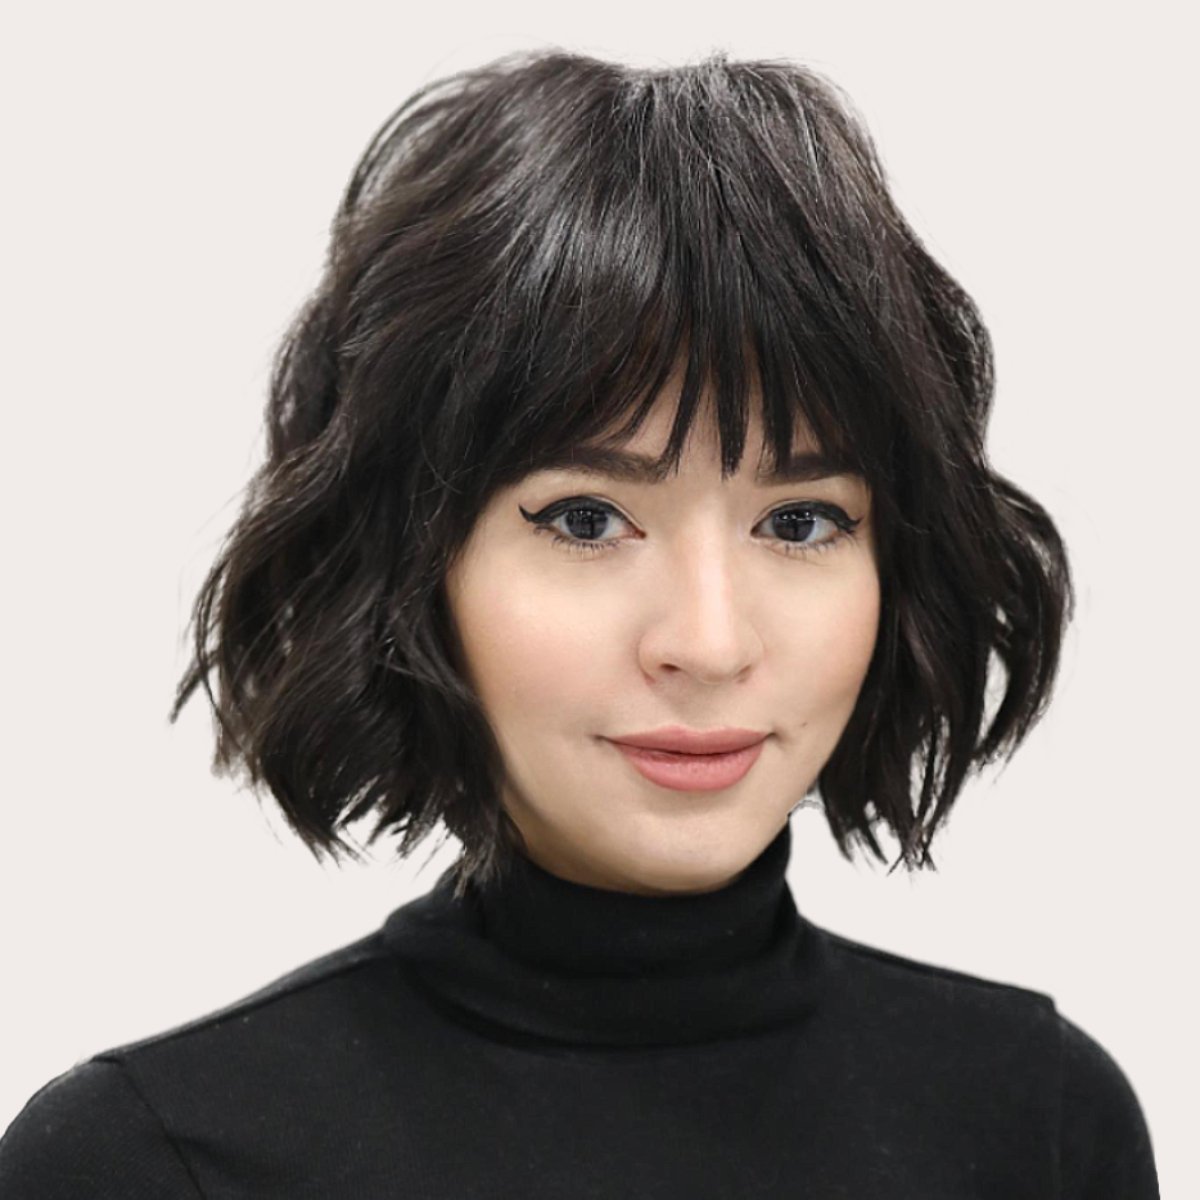 Why is The Bob the Hottest Haircut Right Now?